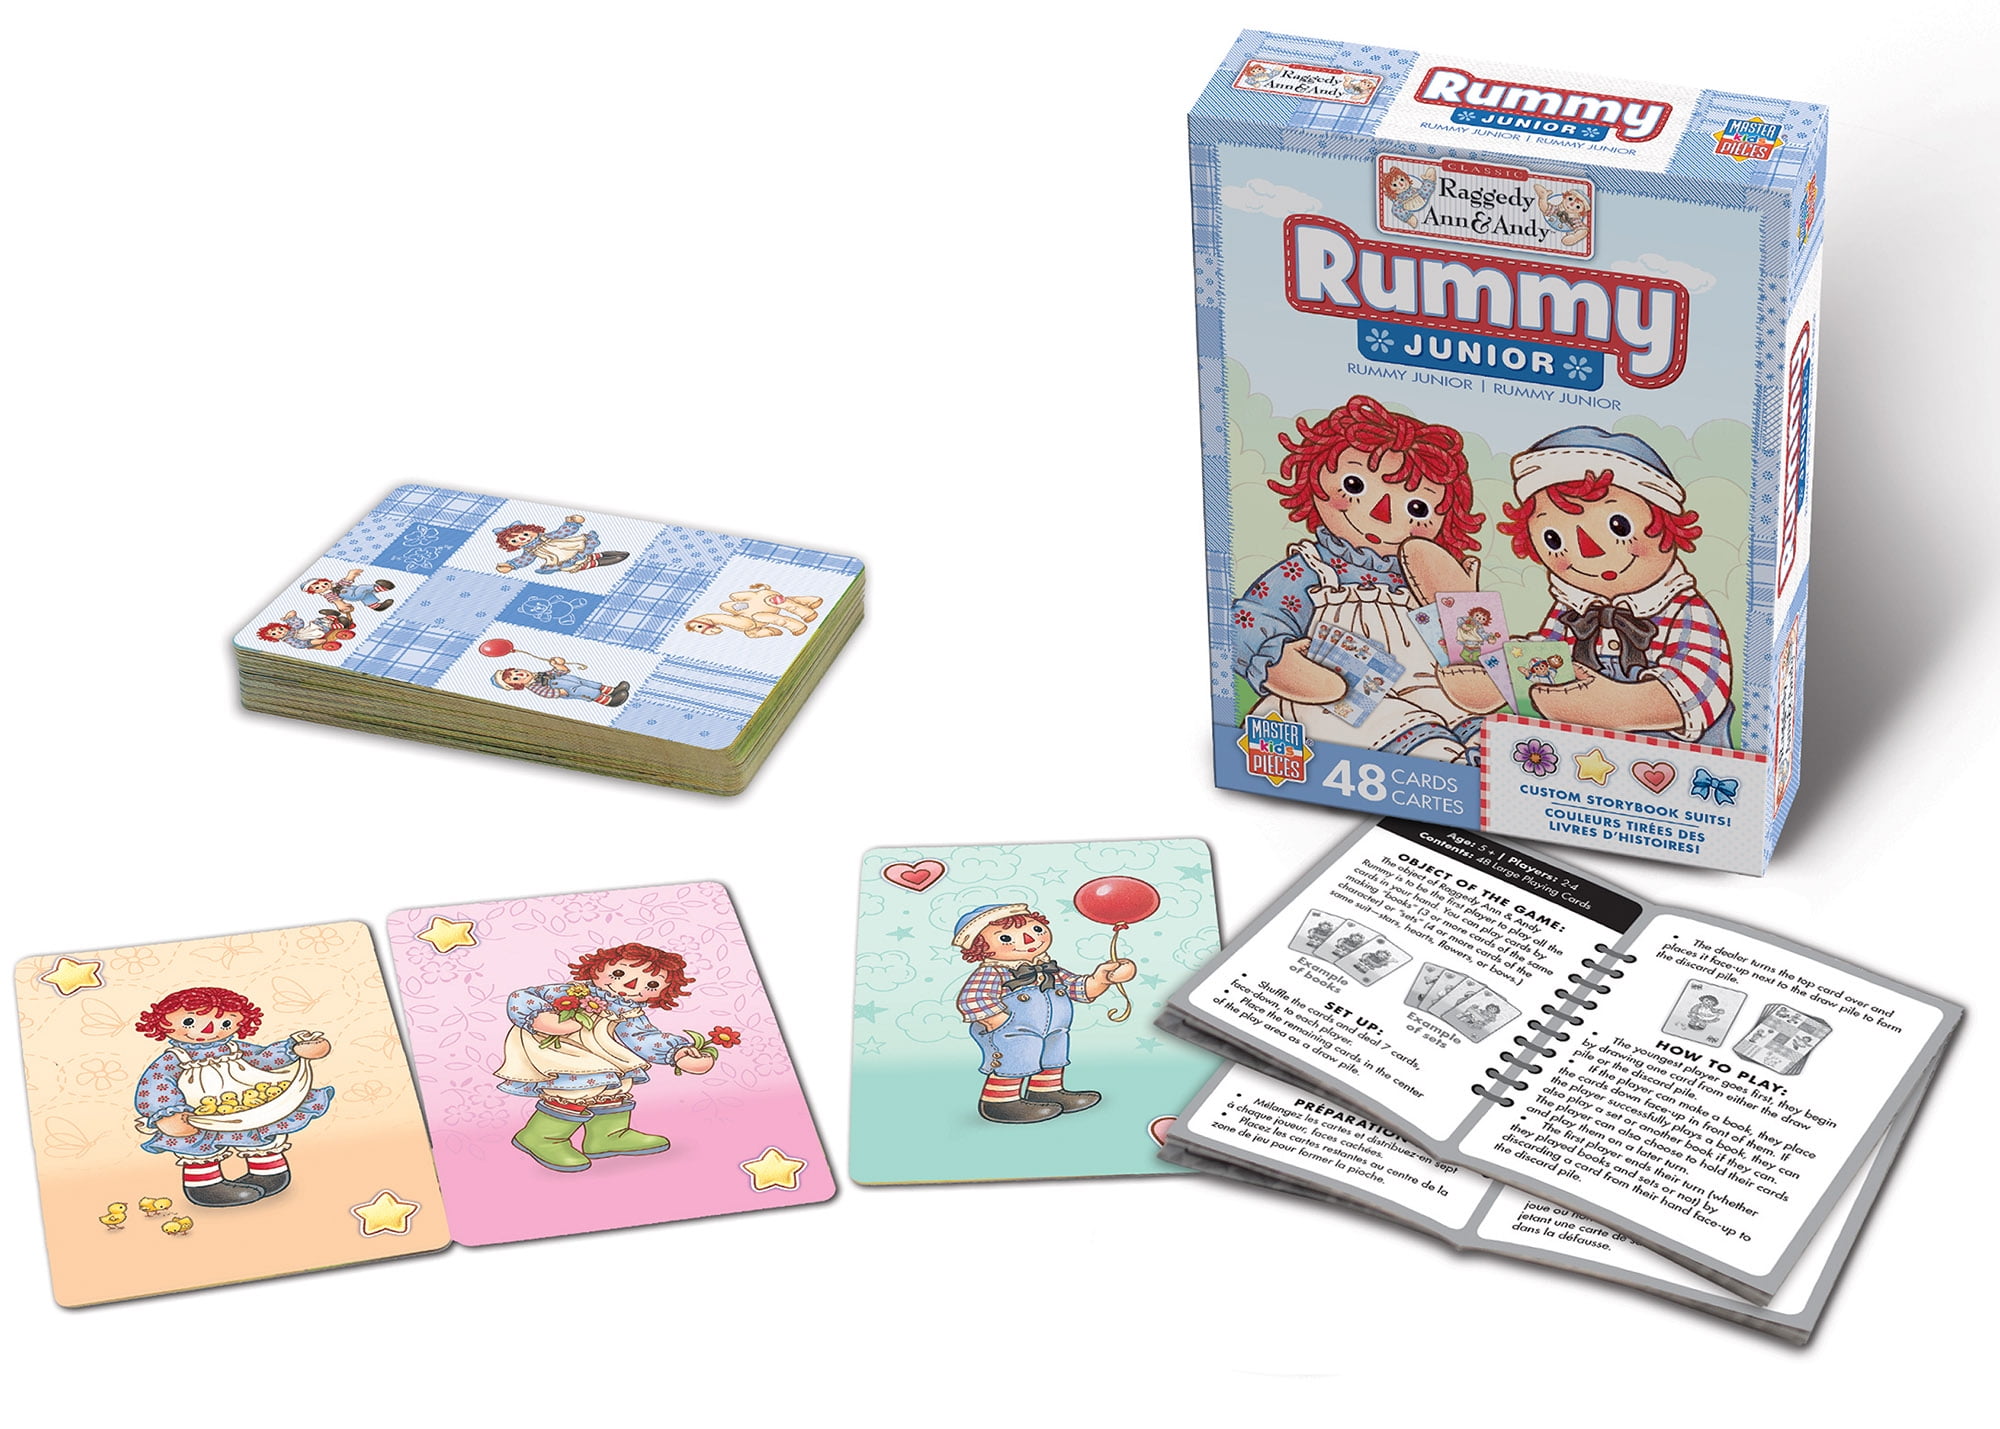 Details about   Raggedy Ann & Andy Rummy Jr Game In Box by Masterpieces Brand New Product! 